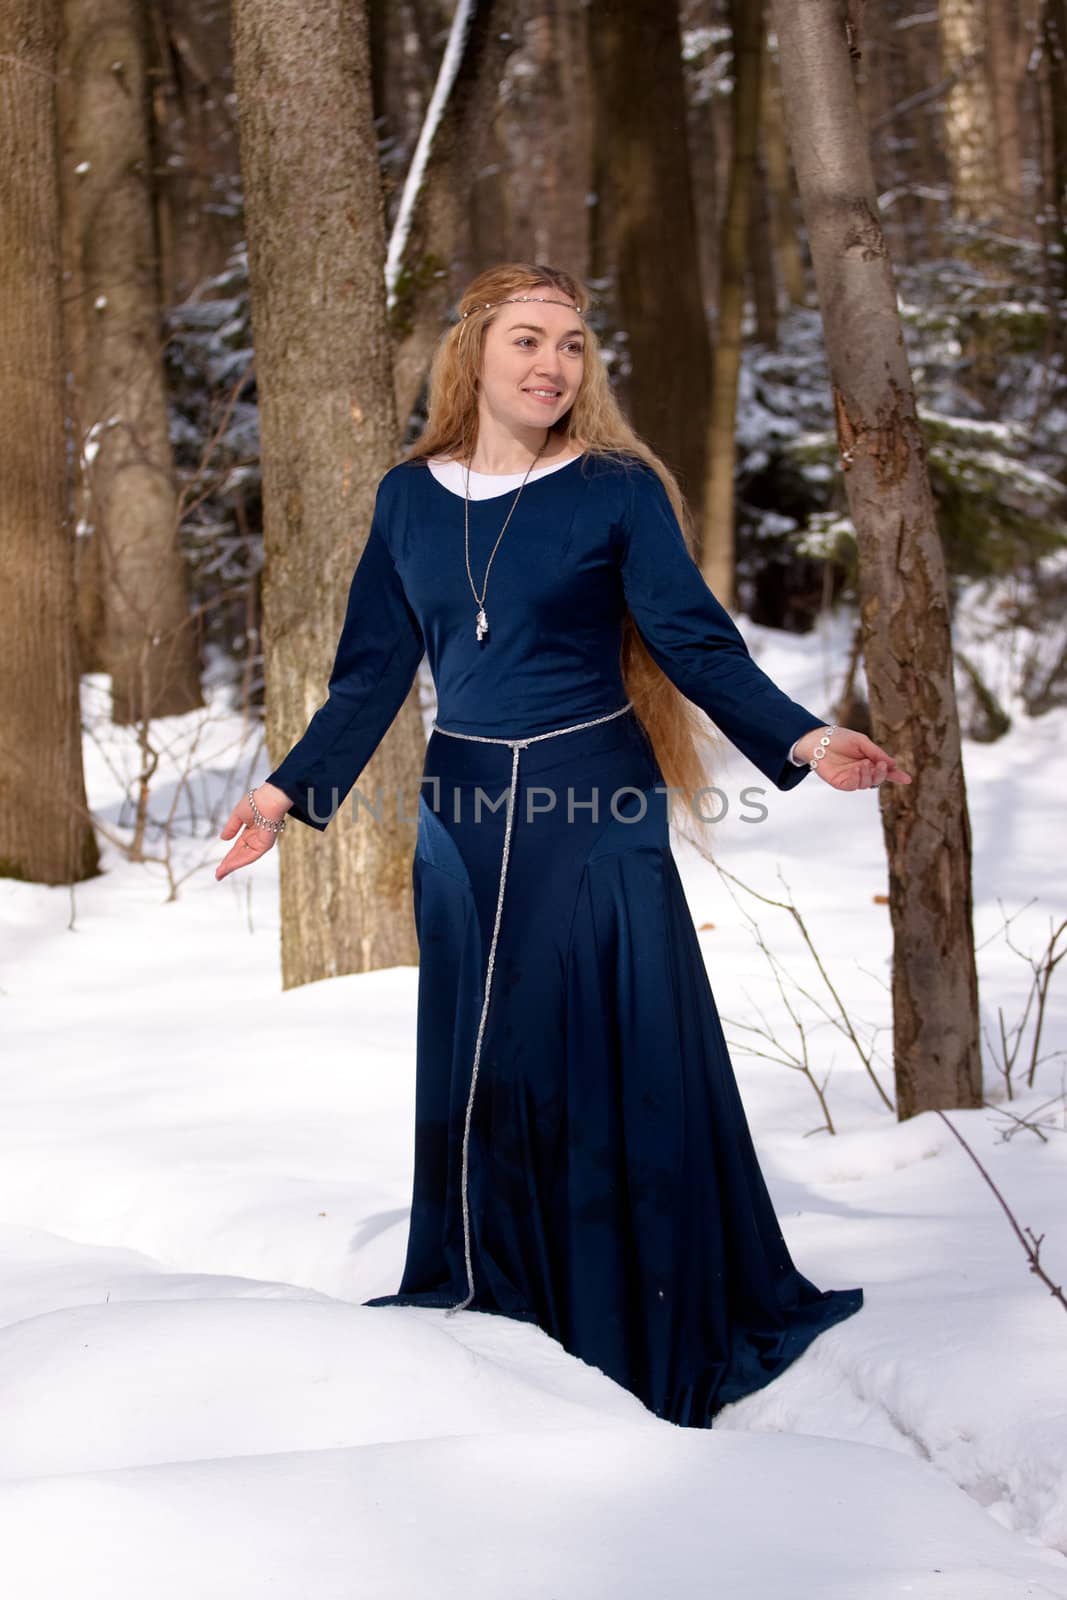 Lady in blue dress and tree trunks
